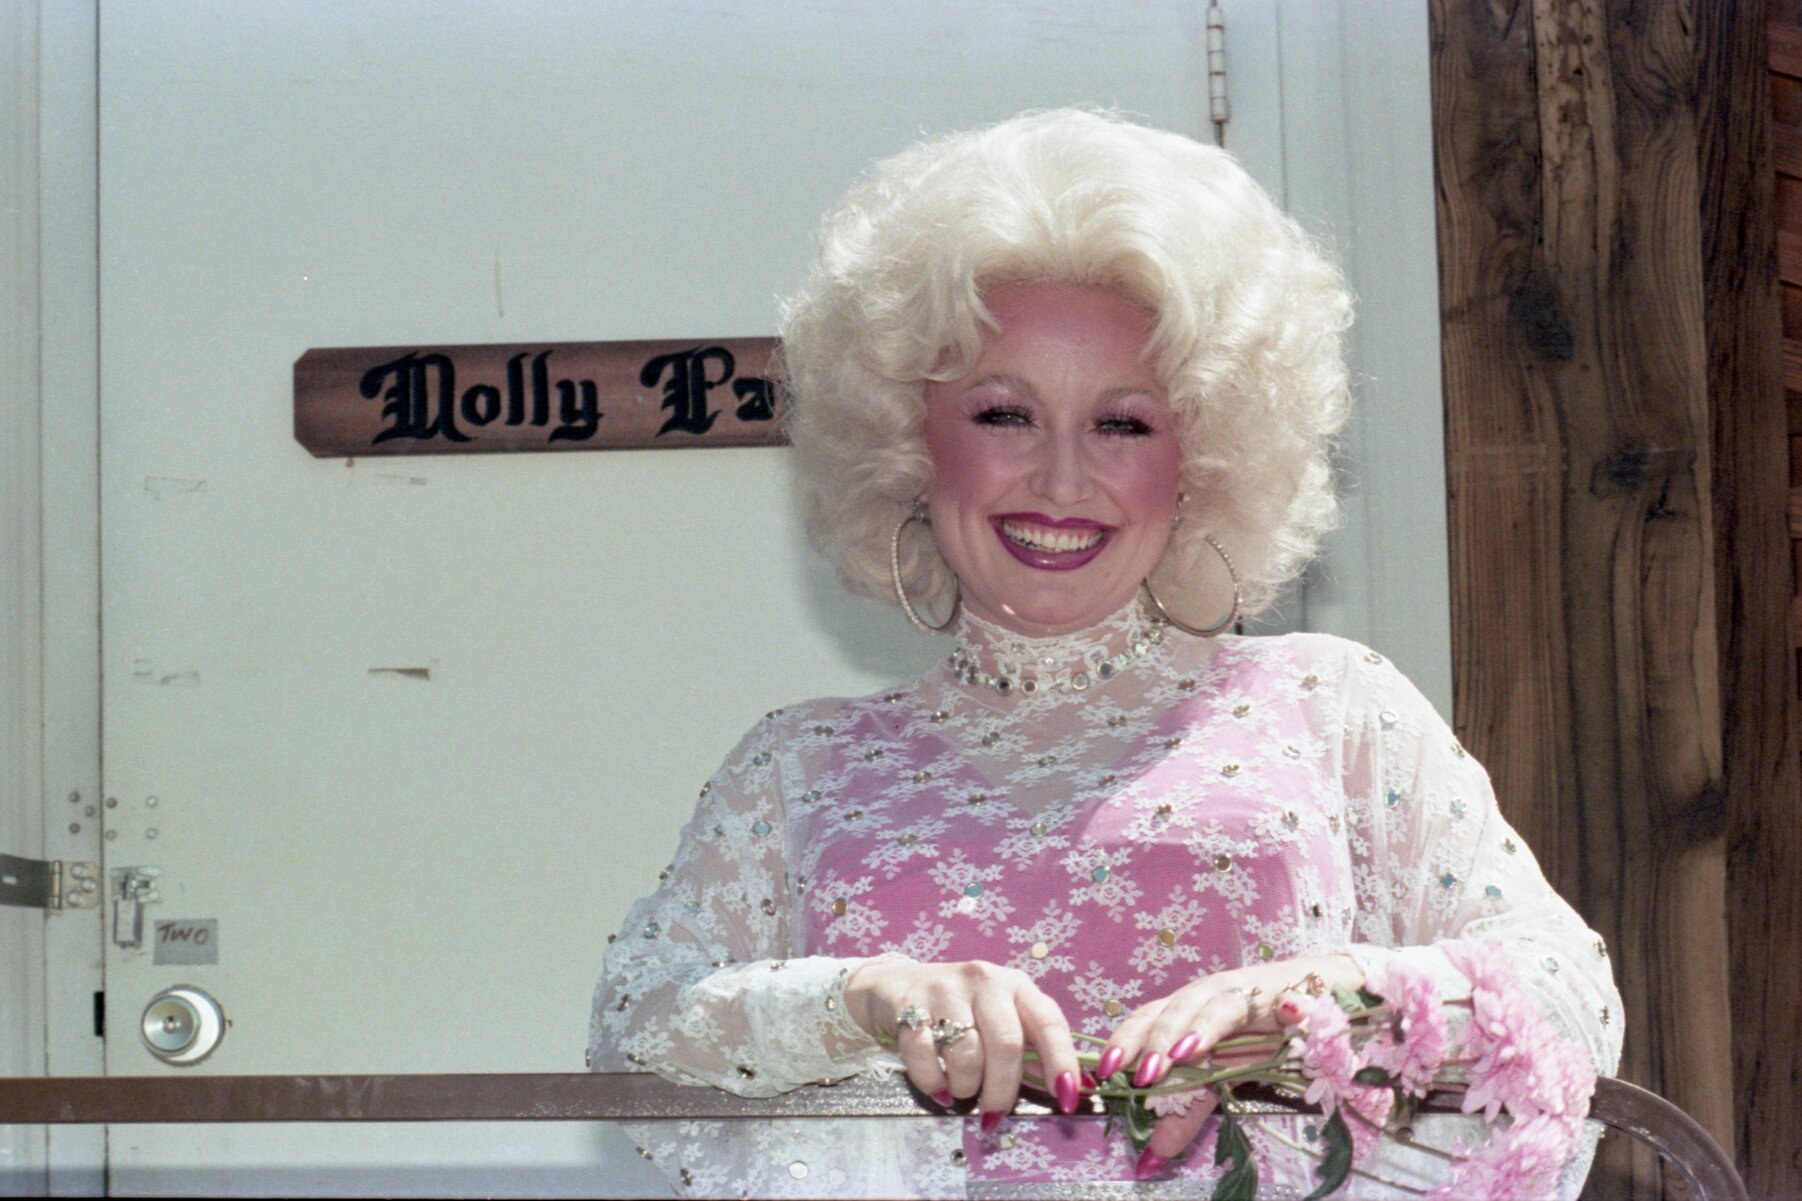 Dolly Parton poses for a portrait backstage at Day on the Green concert at Oakland Coliseum on May 28, 1978 in Oakland, California.